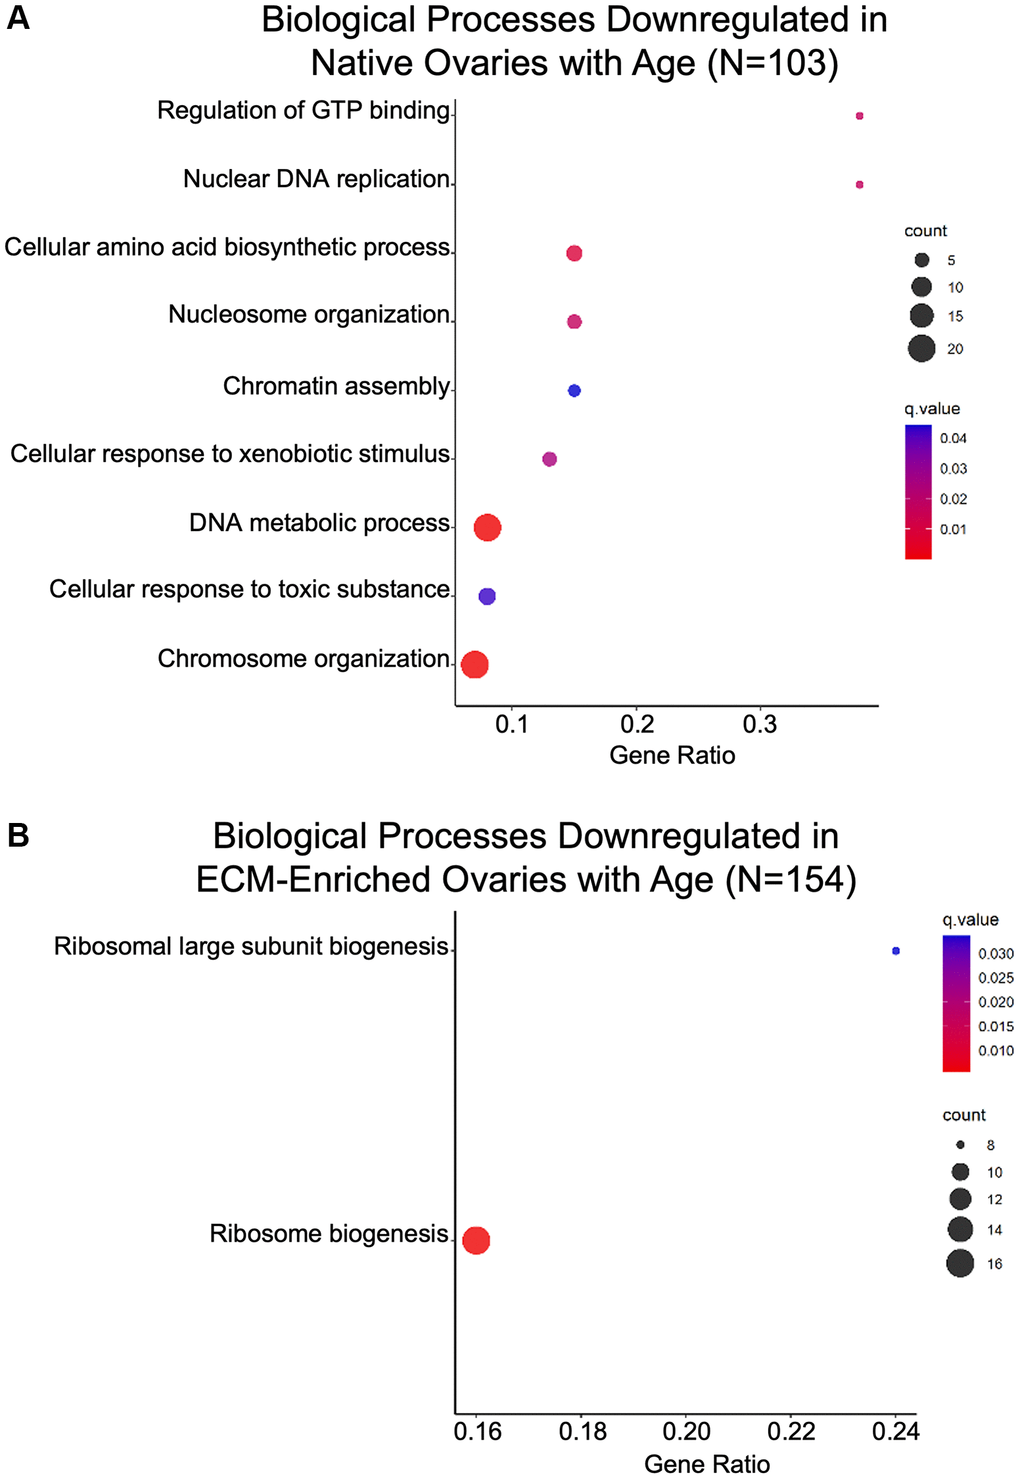 Biological processes associated with genomic stability and proteostasis are downregulated in the ovary with age. GO analysis of proteins significantly downregulated with age from (A) native and (B) ECM-enriched ovaries was performed using consensus pathway database (CPDB) at level 4, q-value 